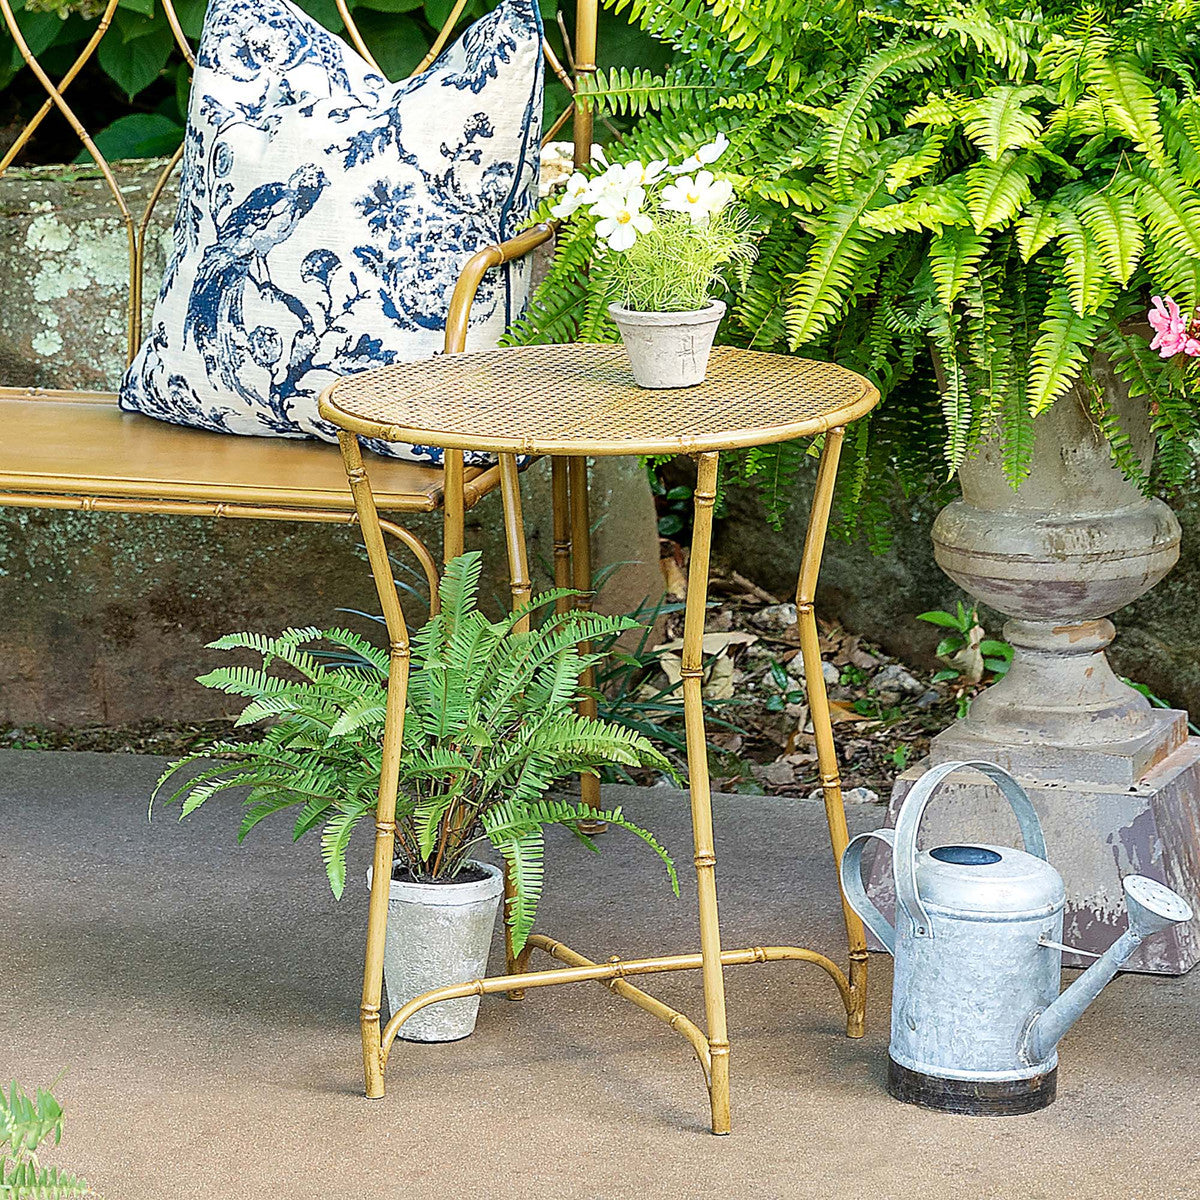 a metal table in an outdoor patio setting with a real kimberly queen fern and  artificial blooming plants